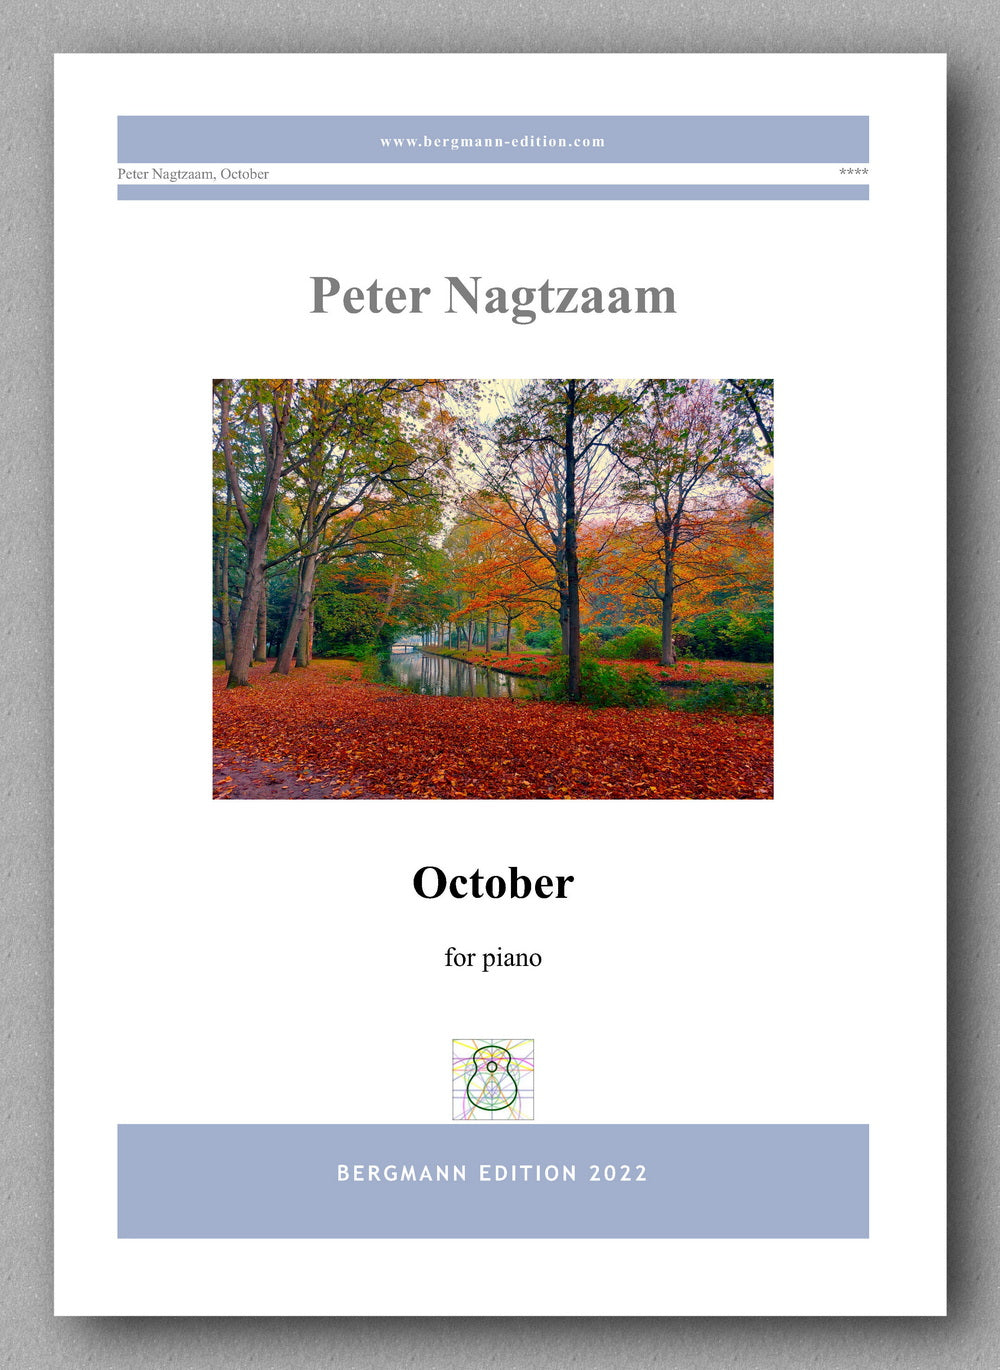 Peter Nagtzaam, October - piano version - preview of the cover